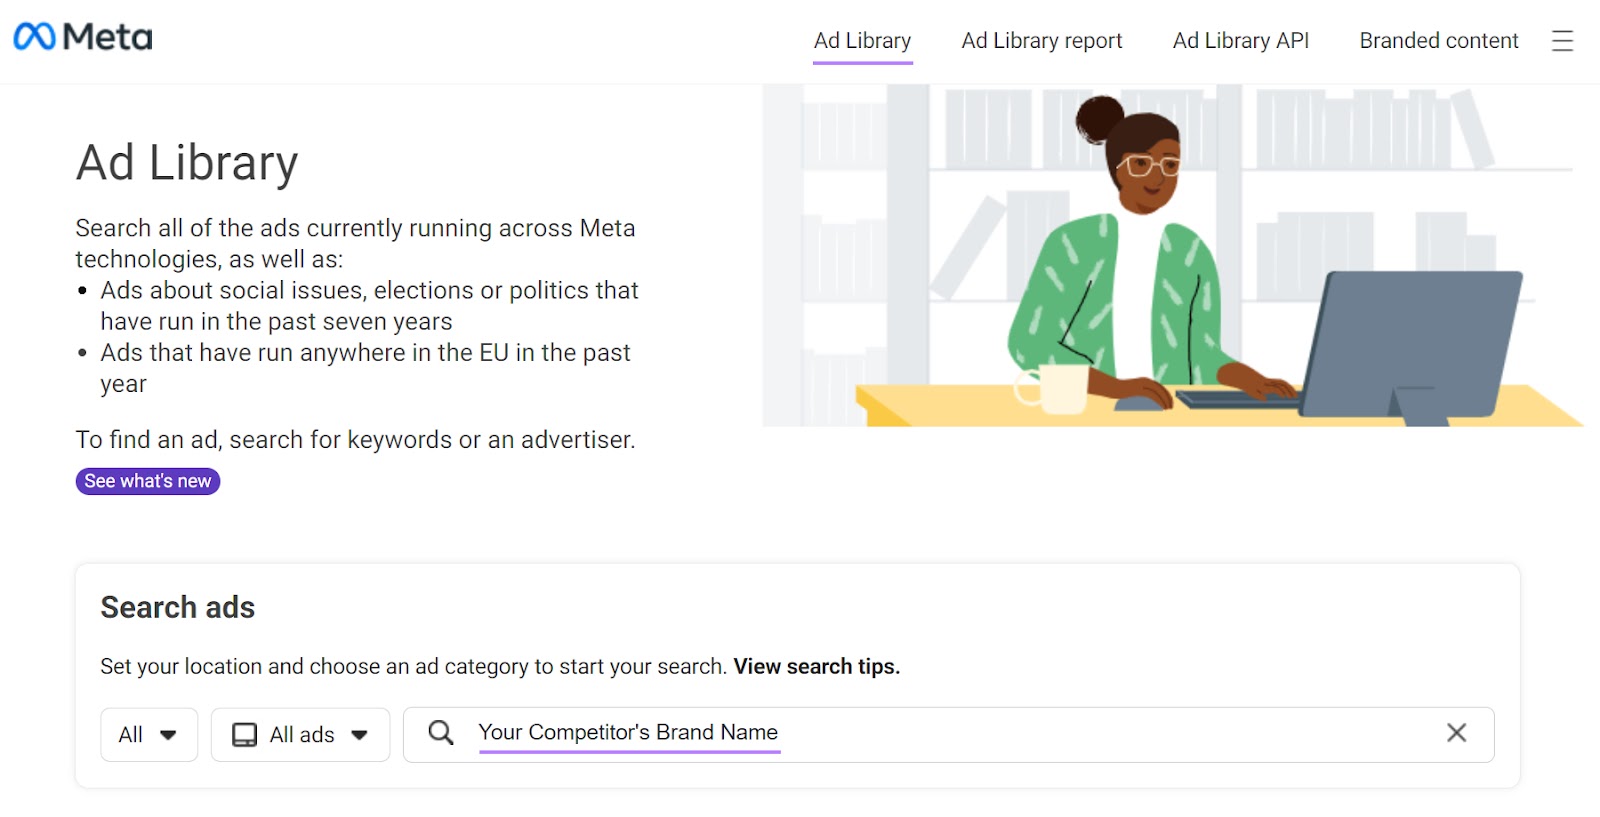 Meta’s Ad Library page